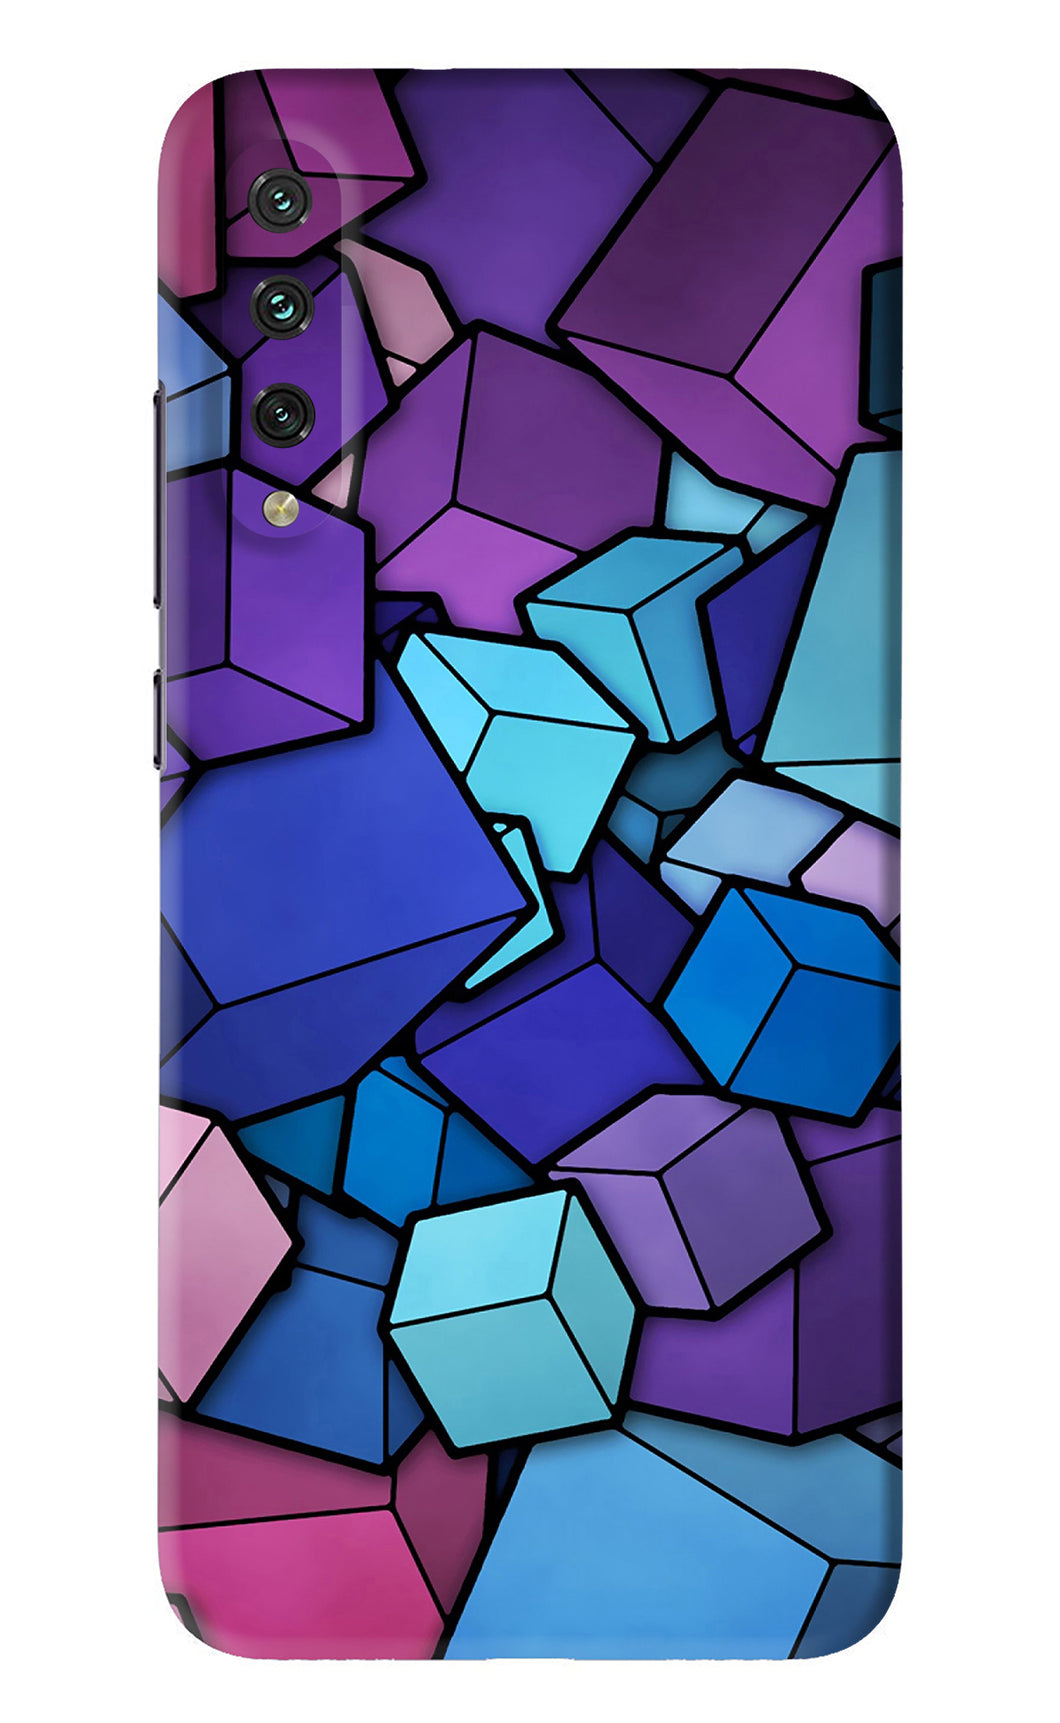 Cubic Abstract Xiaomi Mi A3 Back Skin Wrap